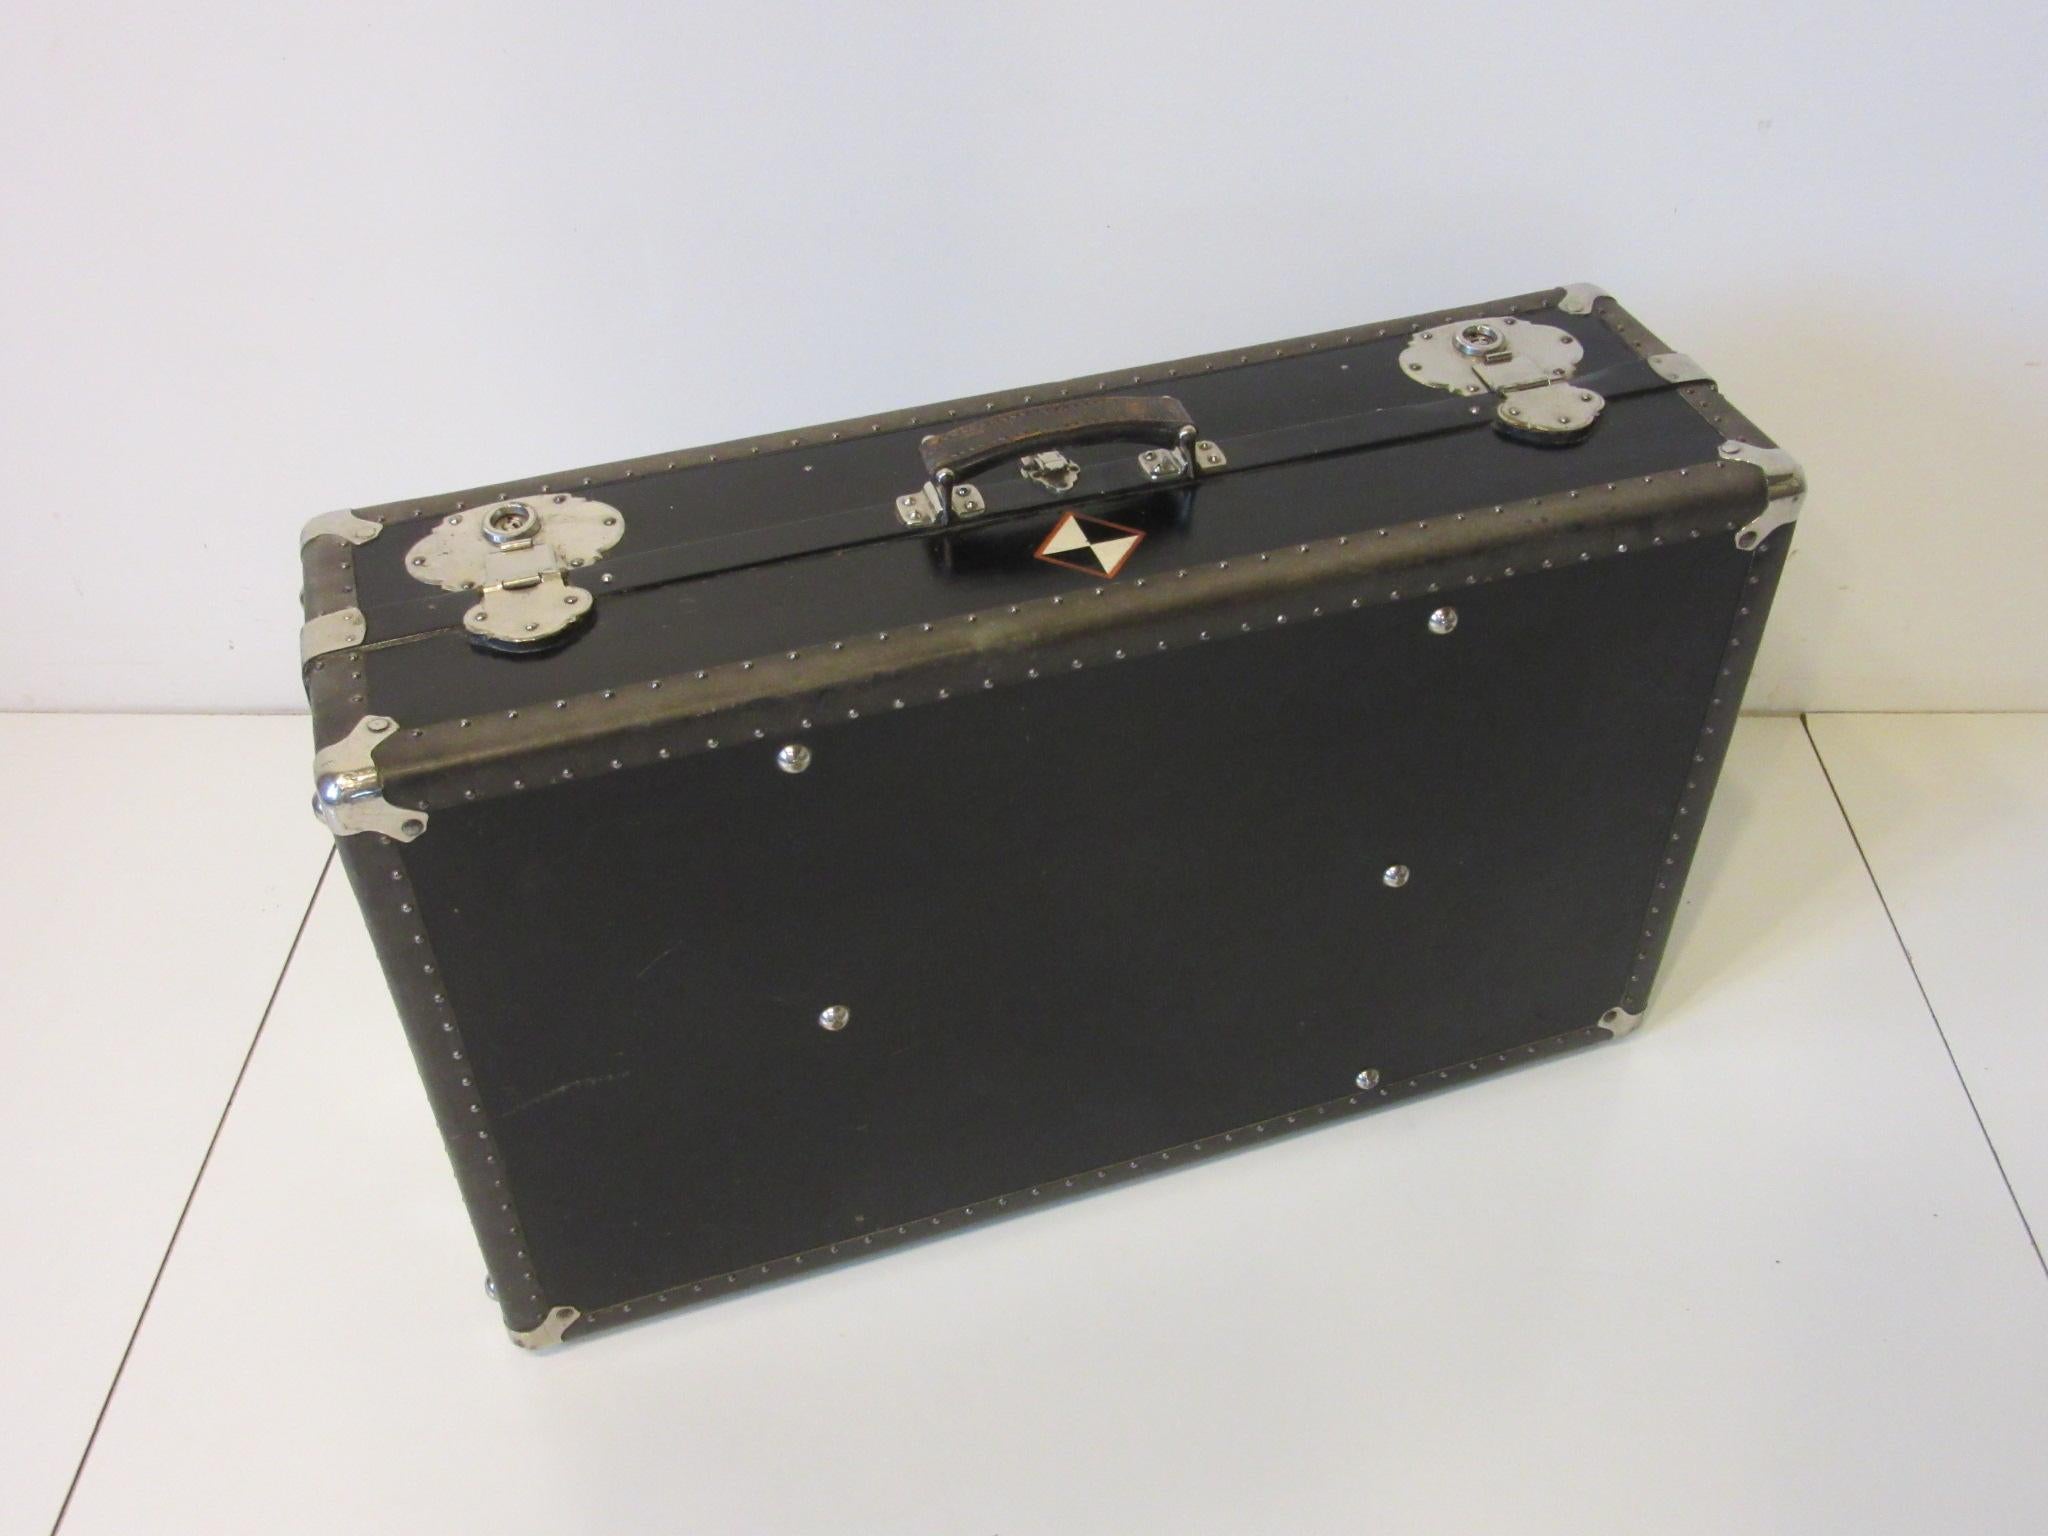 A very well constructed vintage Industrial Art Deco styled trunk suit case having a thick leather handle, banded and small studs to the edging with chromed heavy hardware, locks and corner protectors to the outside. The inside contains a fold away